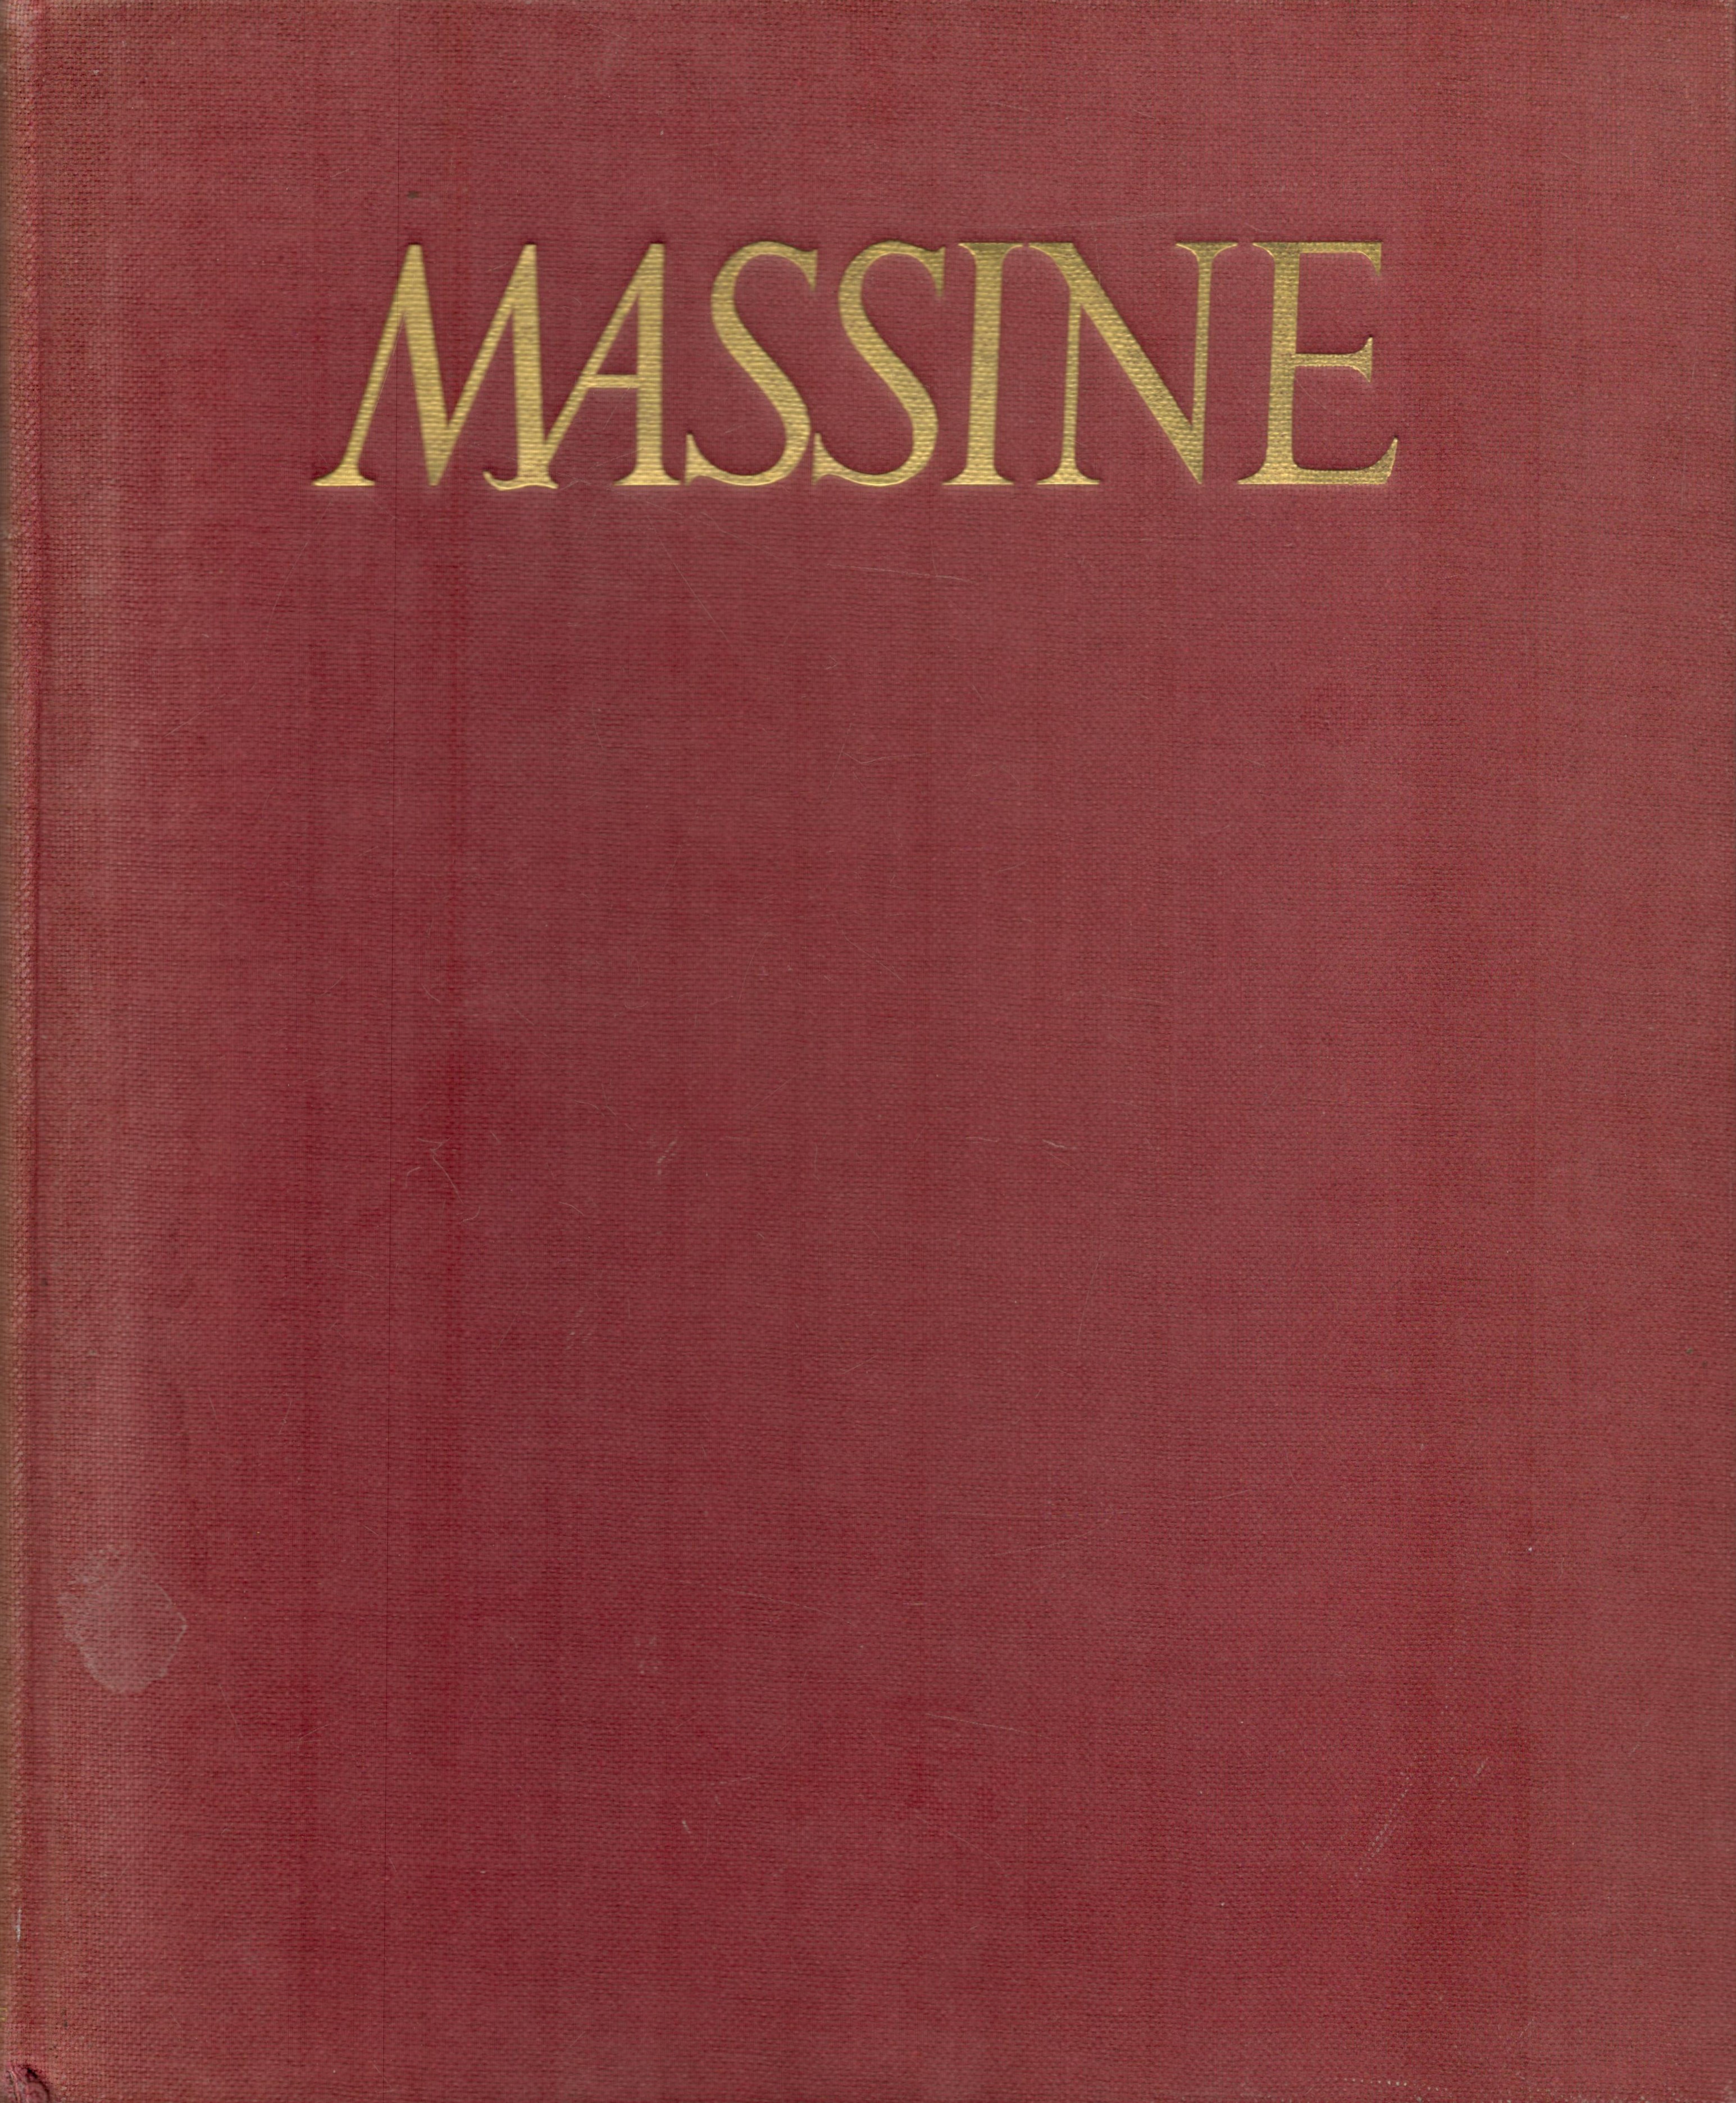 Massine - Camera Studies by Gordon Anthony 1939 hardback book with unnumbered pages, signs of ageing